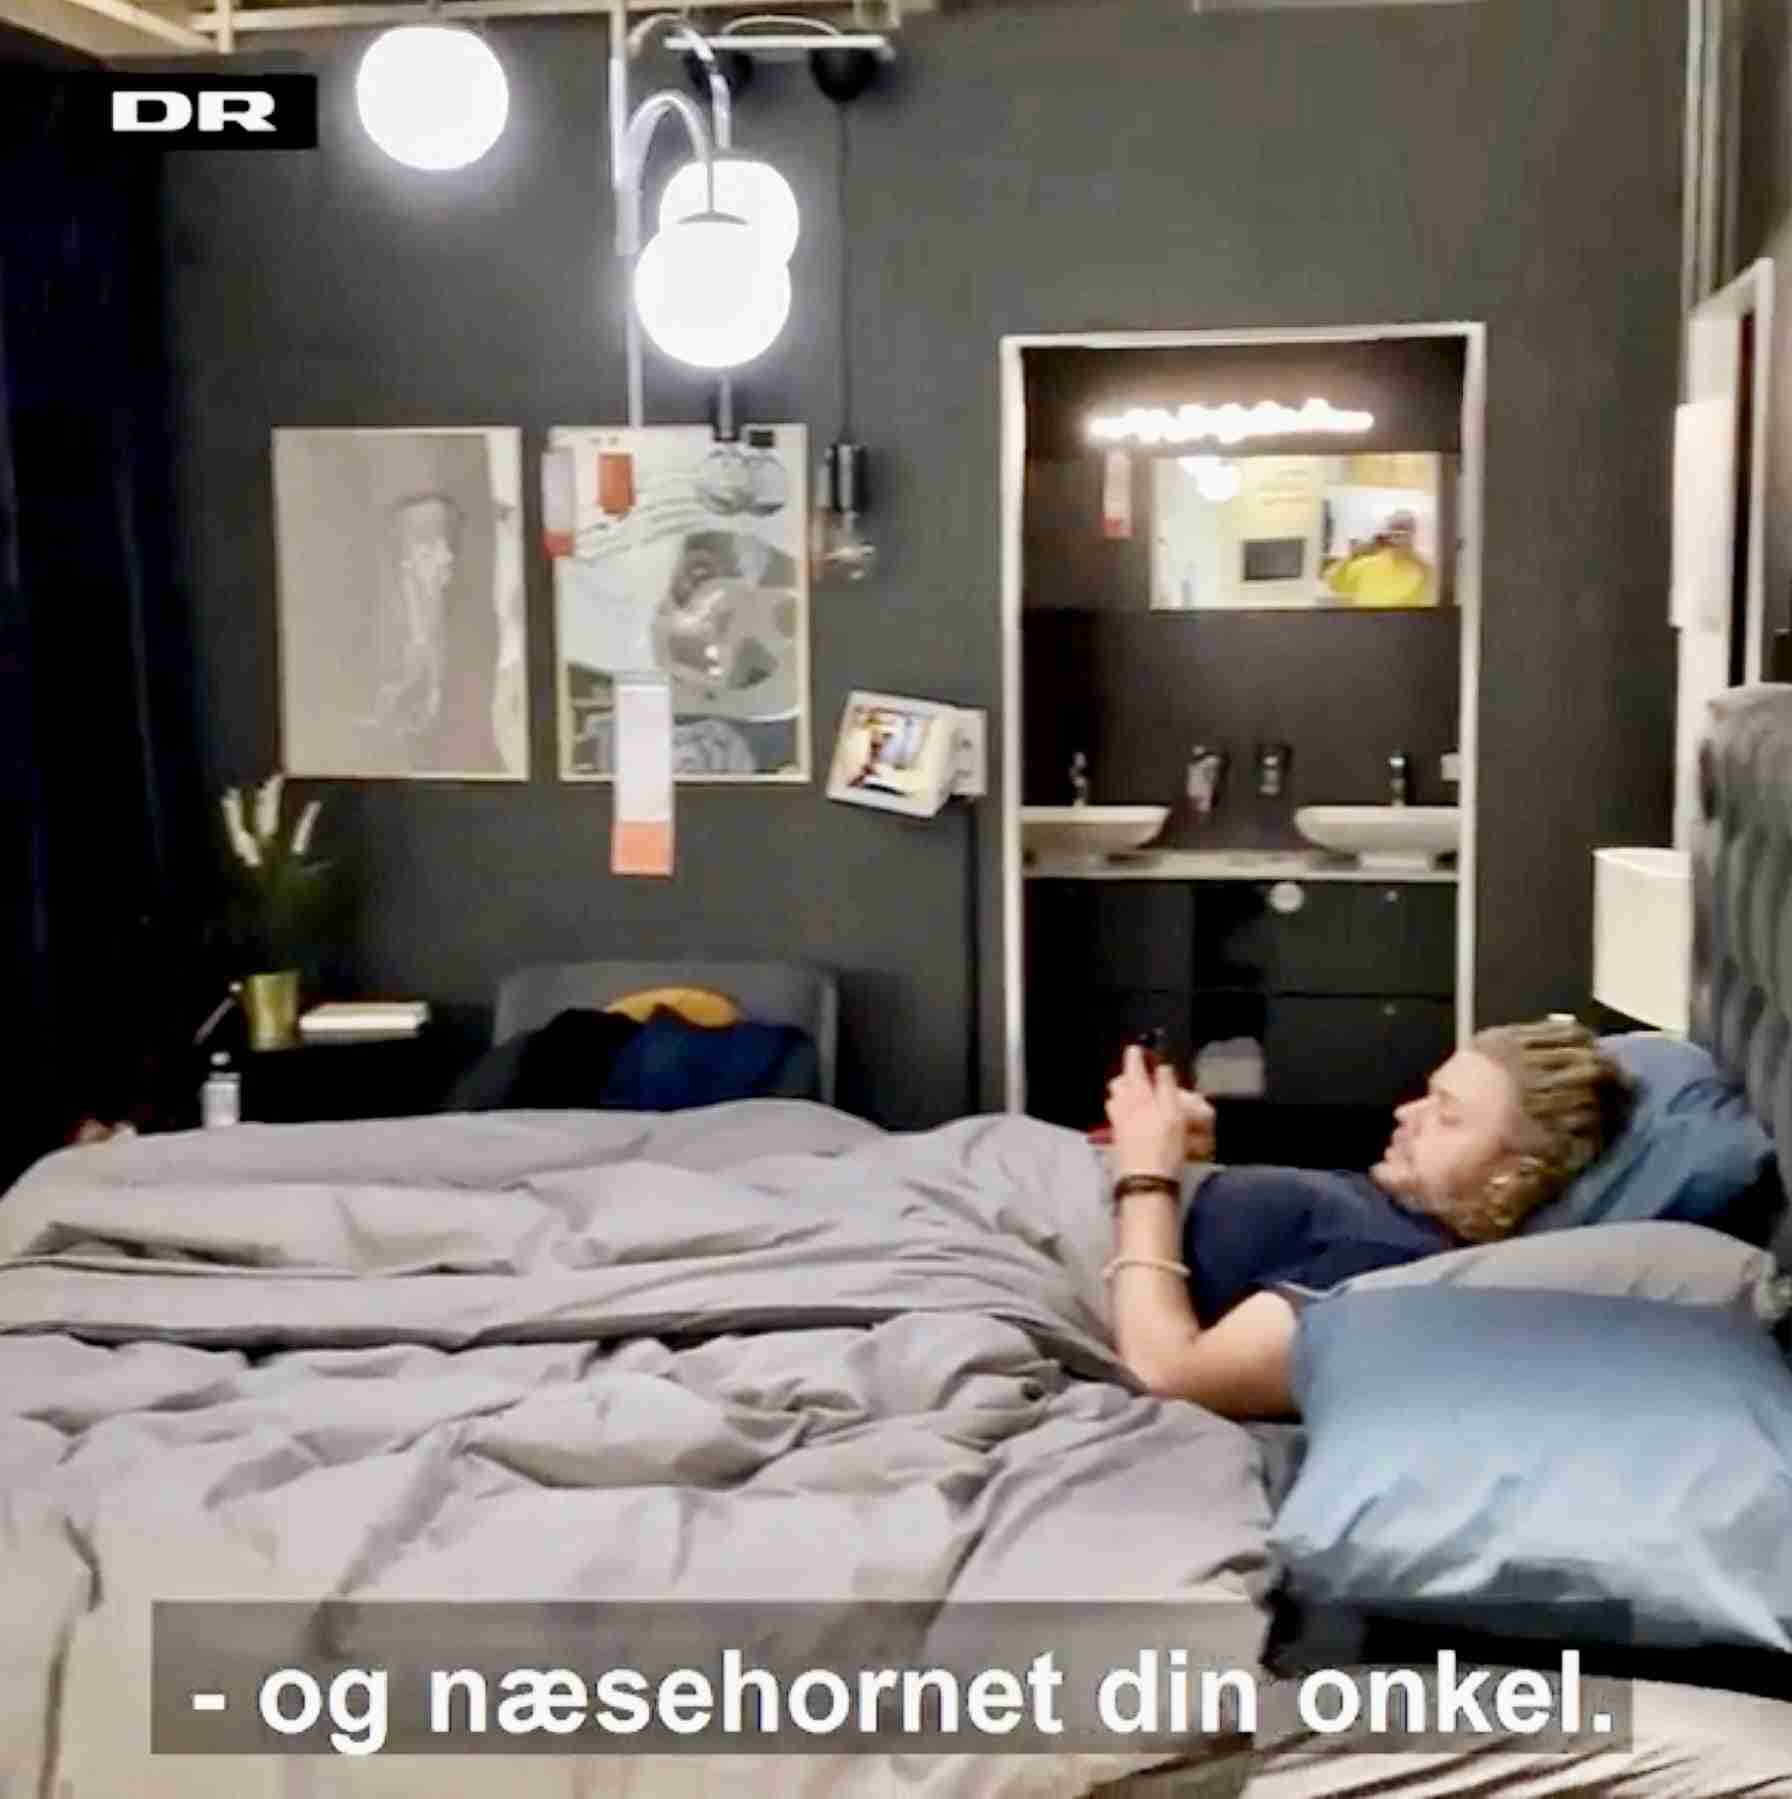 Customers And Staff At This Danish IKEA Got Trapped Inside During A Snowstorm So They Spent The Night Inside